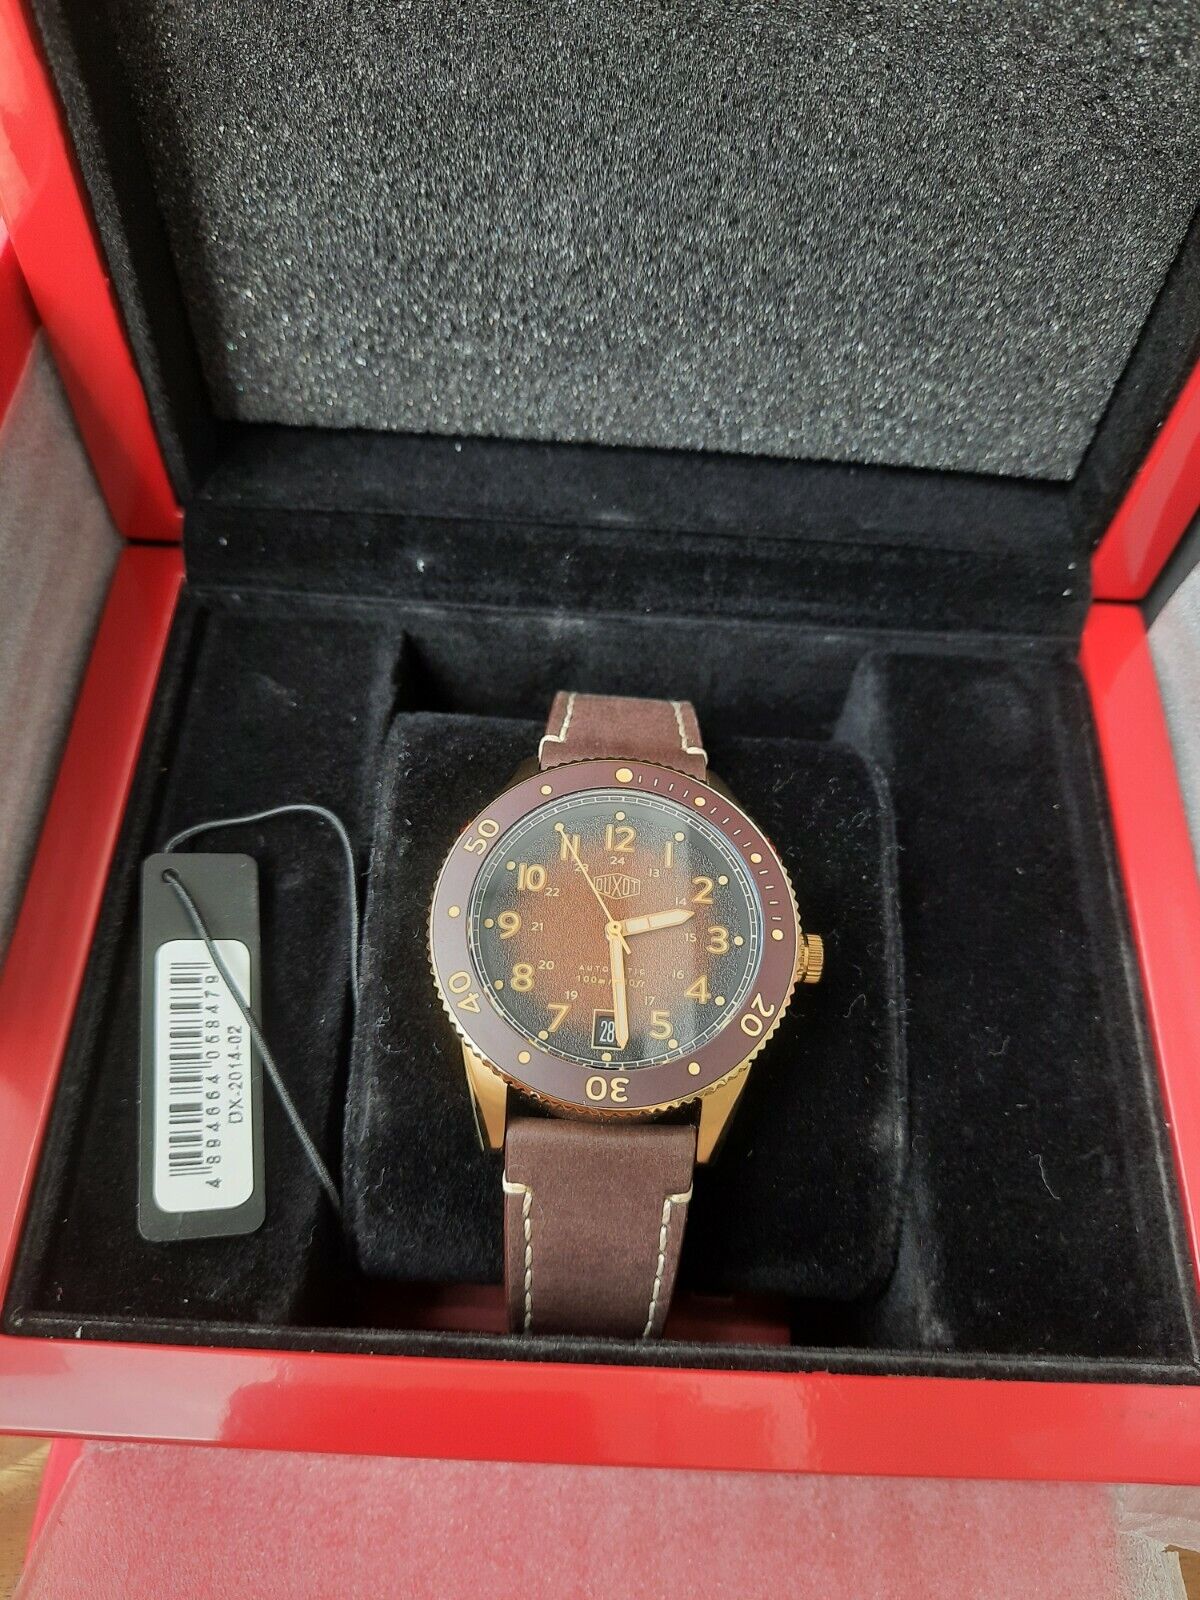 Duxot Velocita Fumee Brown Automatic 40 mm DX-2014-02 w Brown Leather Strap